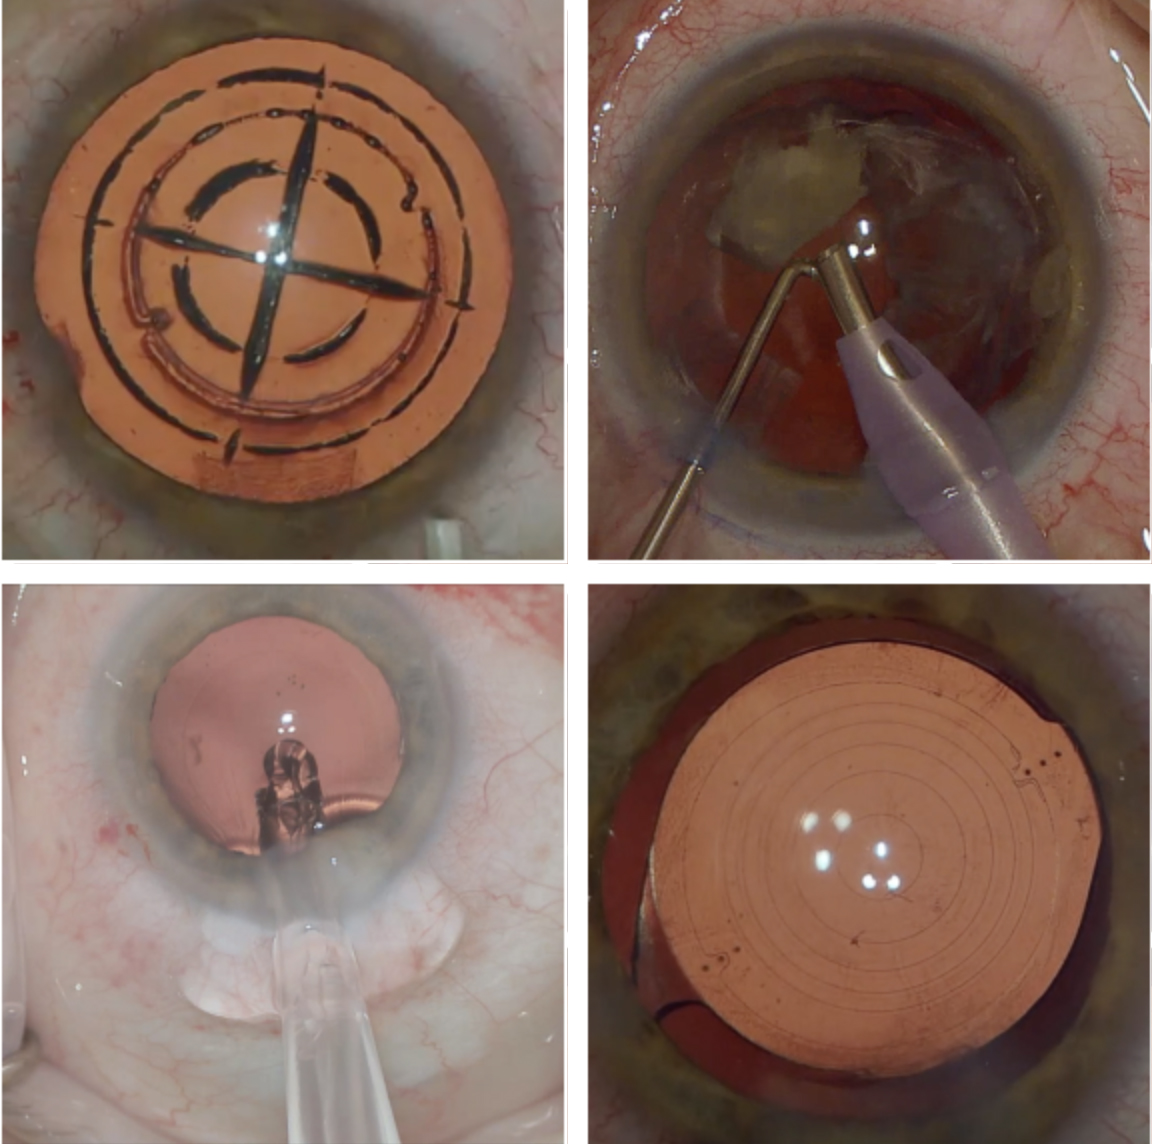 RLE uses a femtosecond laser to soften the lens, create the anterior capsulotomy and create astigmatic keratotomies to correct astigmatism (top left). The cataract or lens is removed by phacoemulsification (top right), and a new lens is inserted (bottom left). Toric IOL placement is evaluated post-op (bottom right).